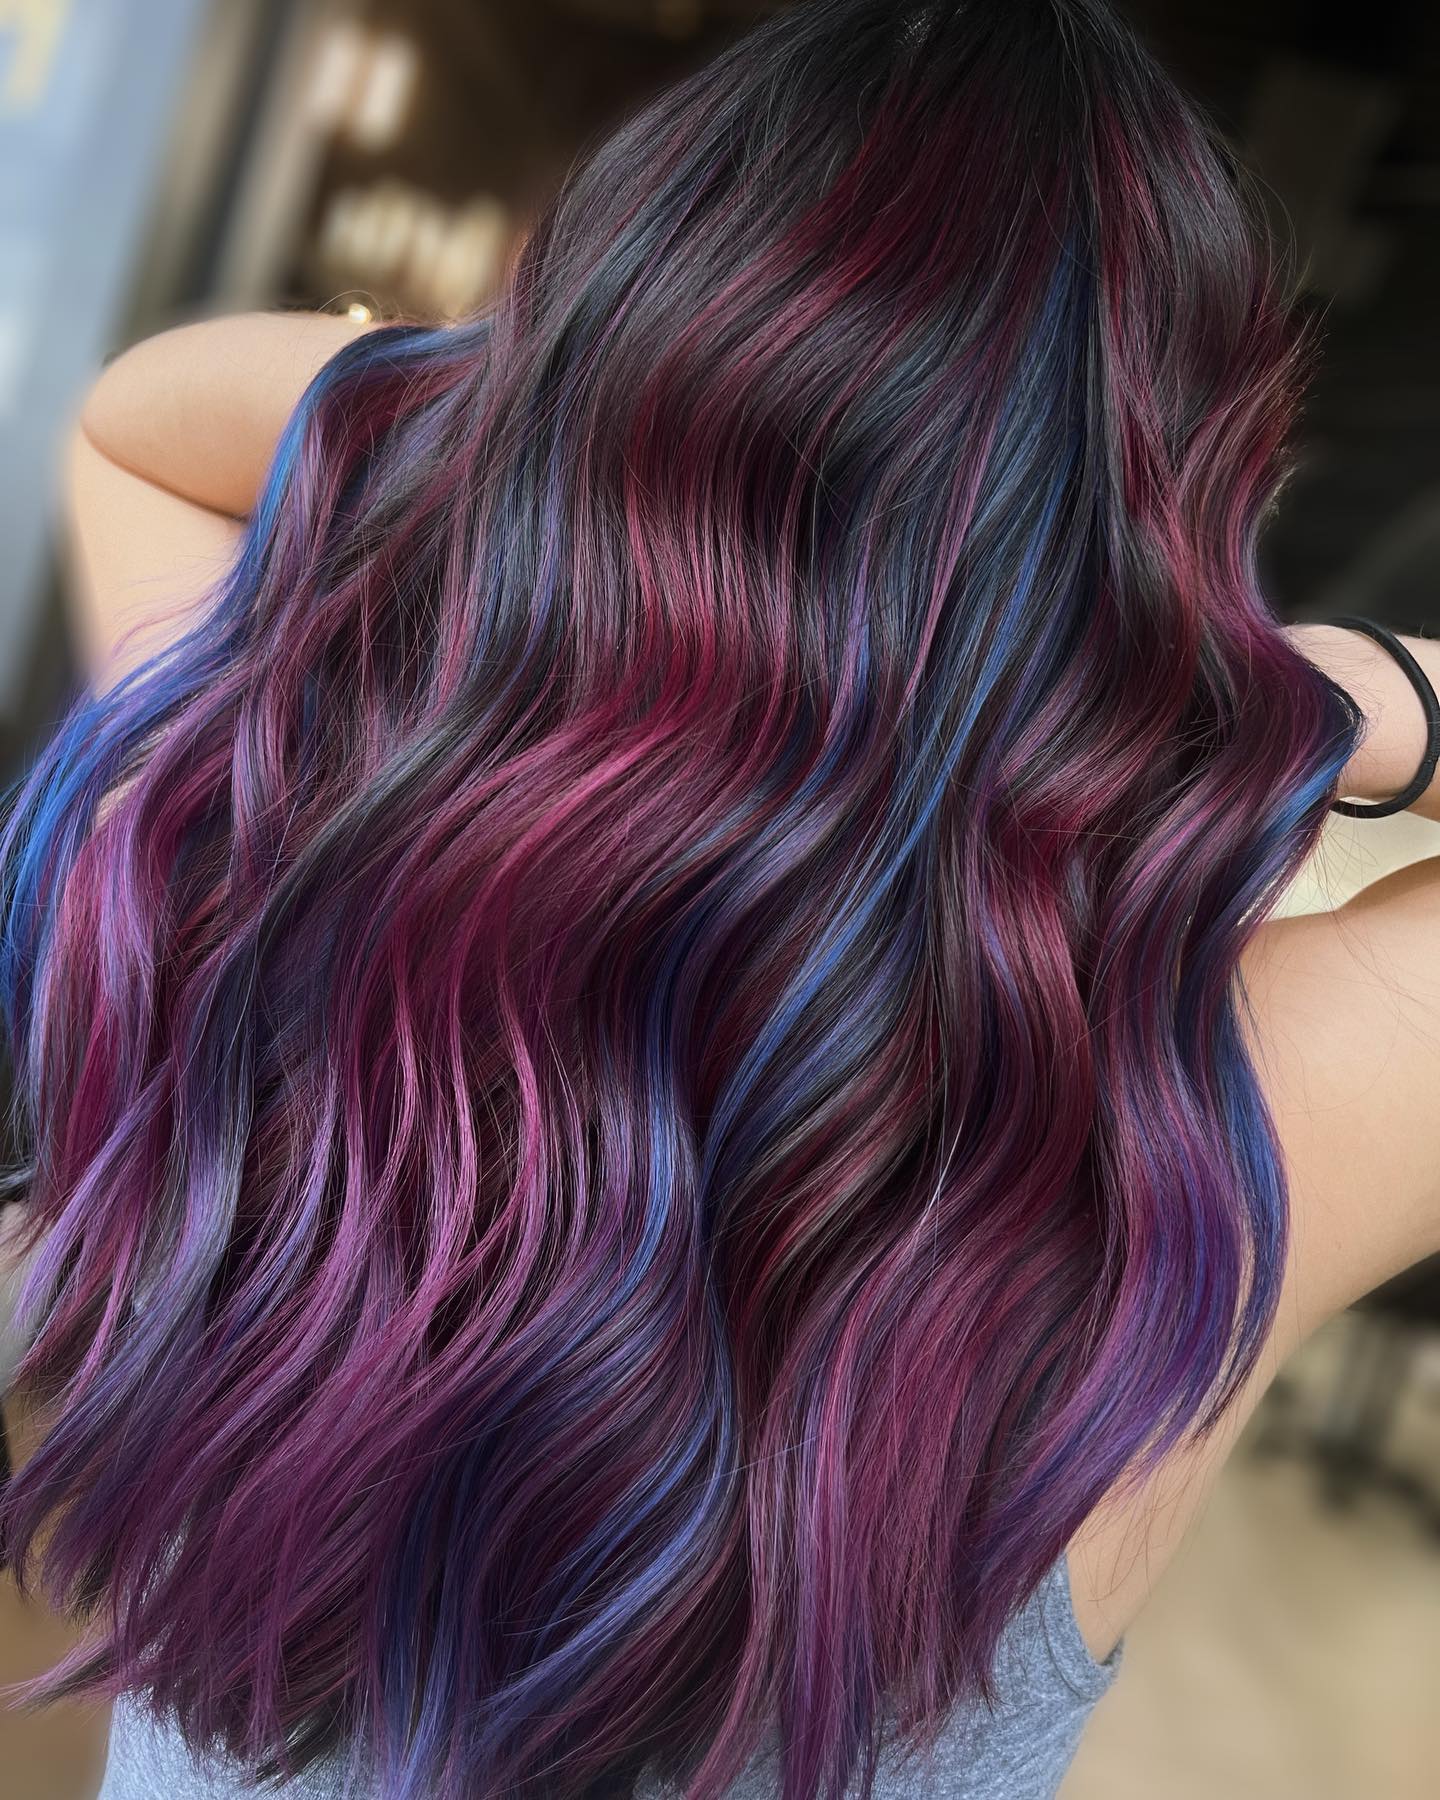 Pink and Blue Highlights on Long Black Hair